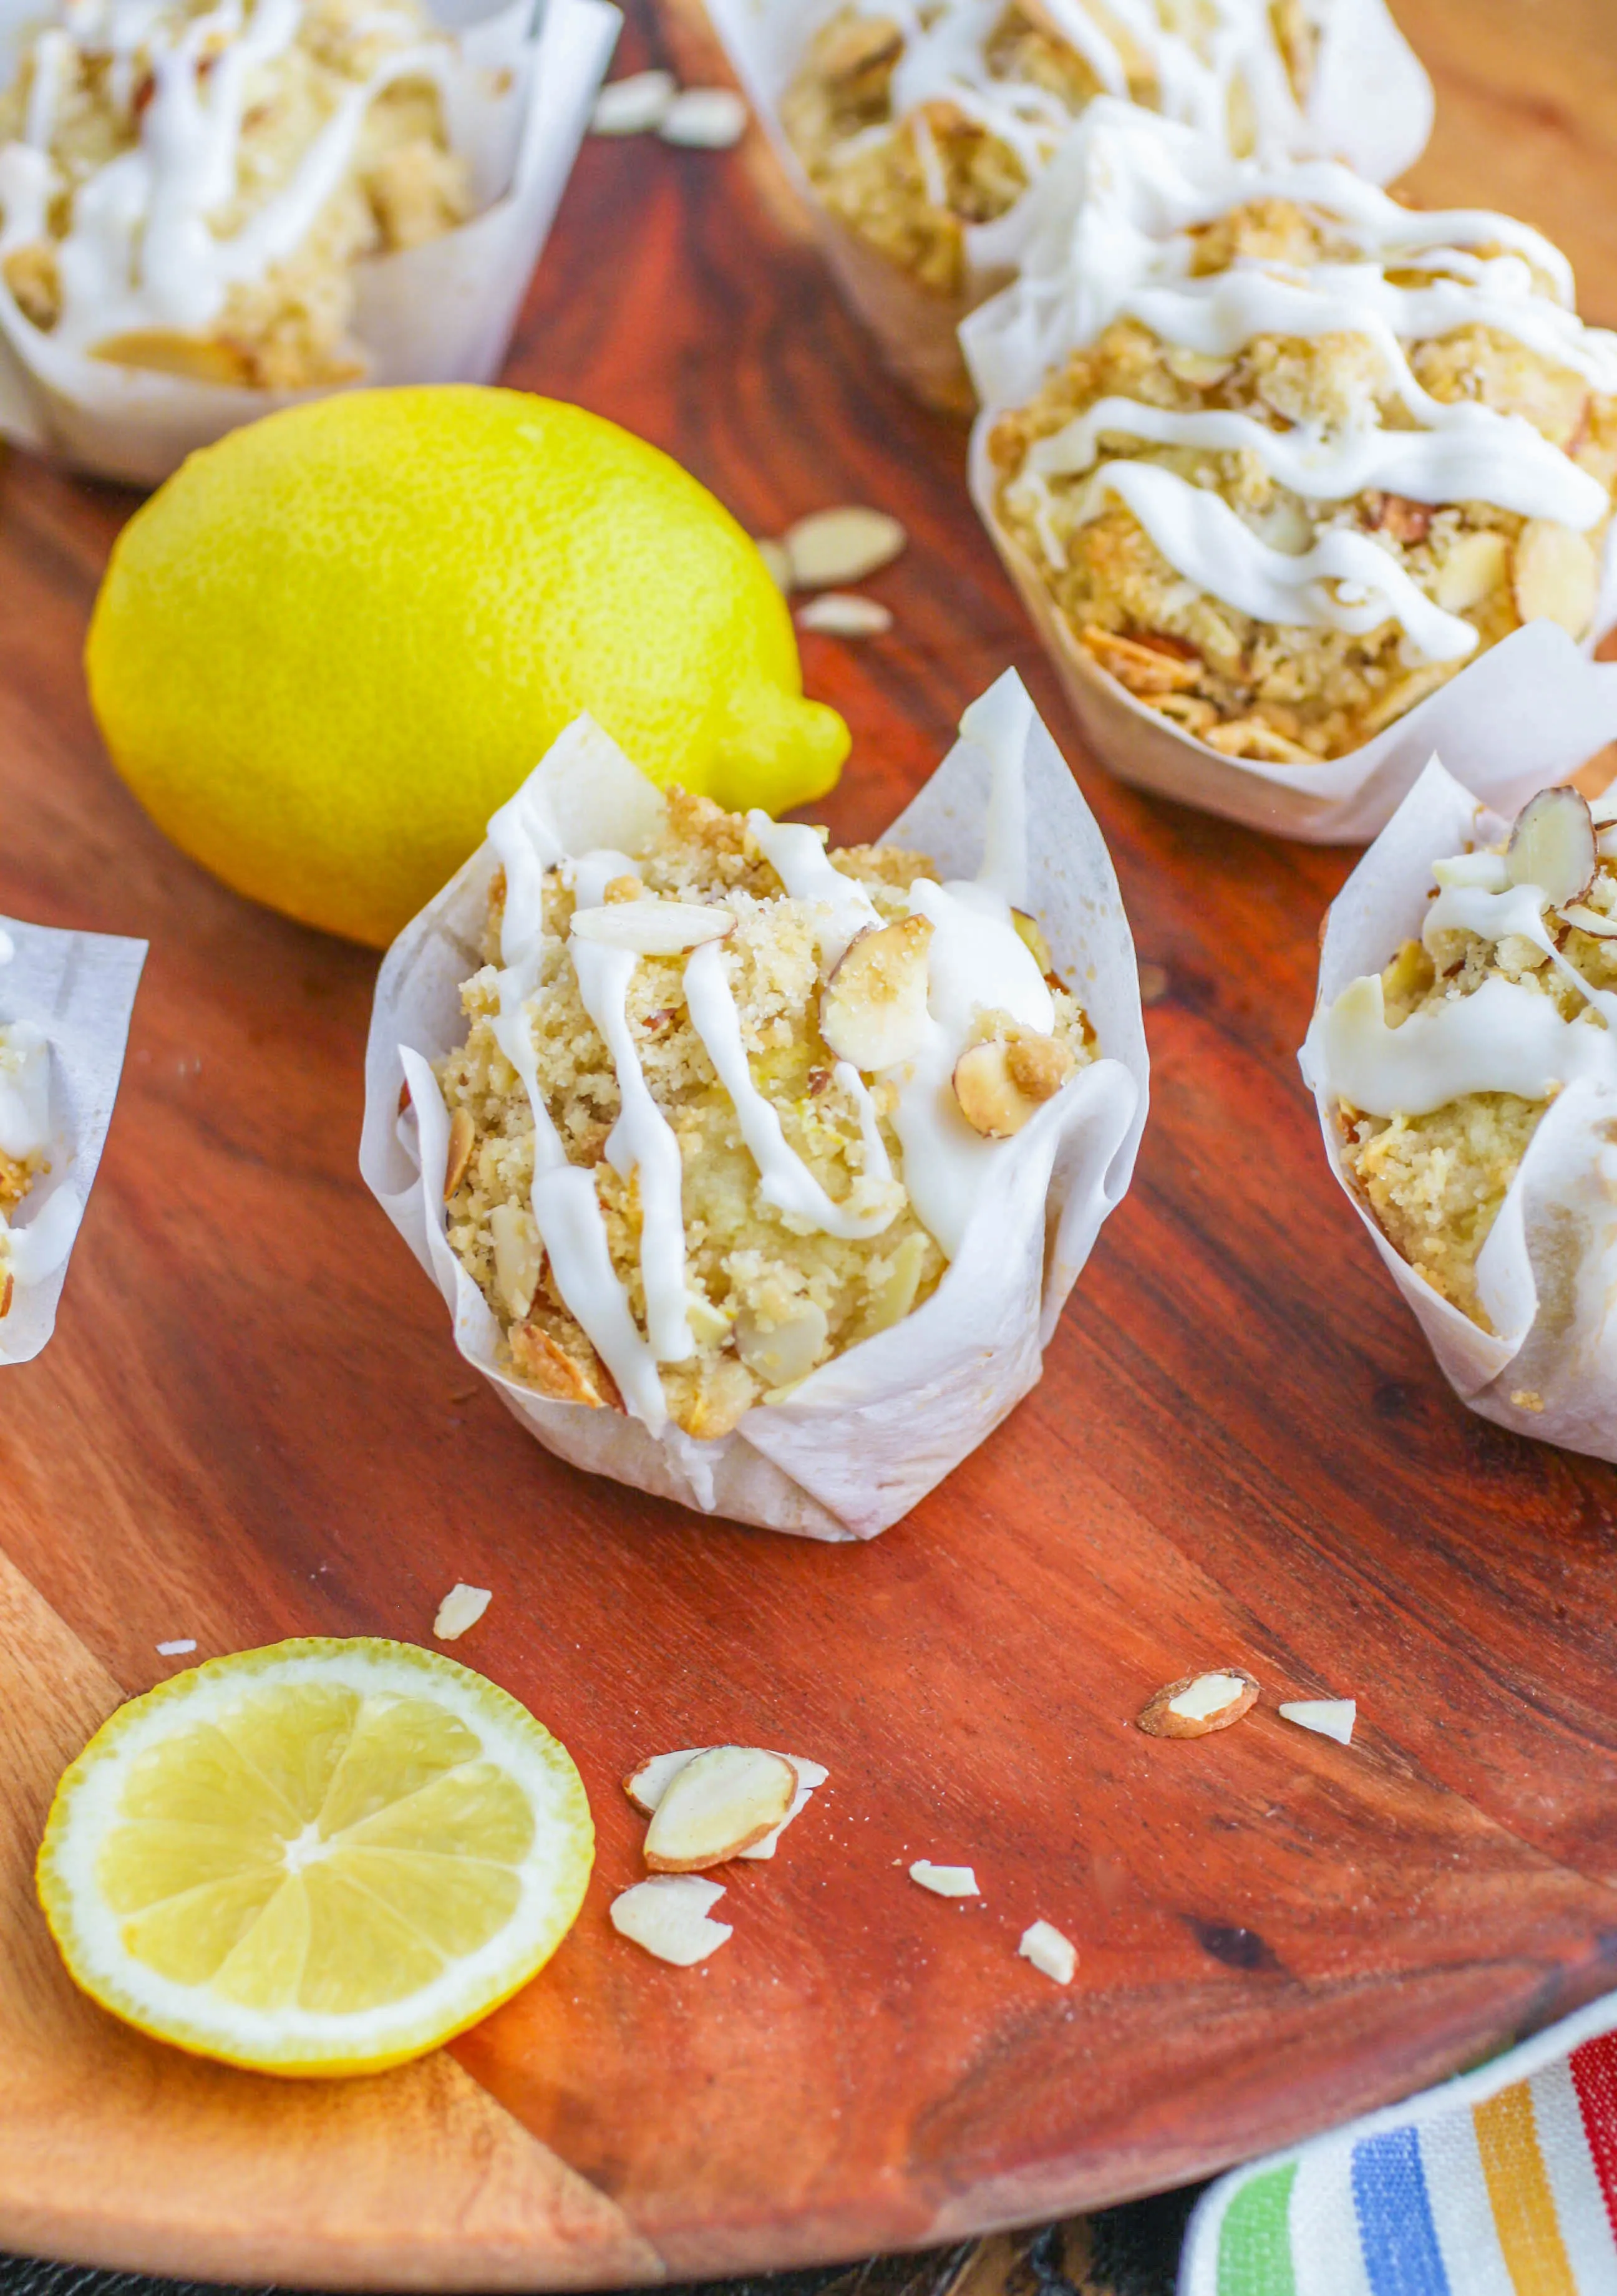 Lemon Muffins with Almond Streusel and Glaze are a great part of your breakfast. You'll love these lemon muffins with a hot cup of coffee!